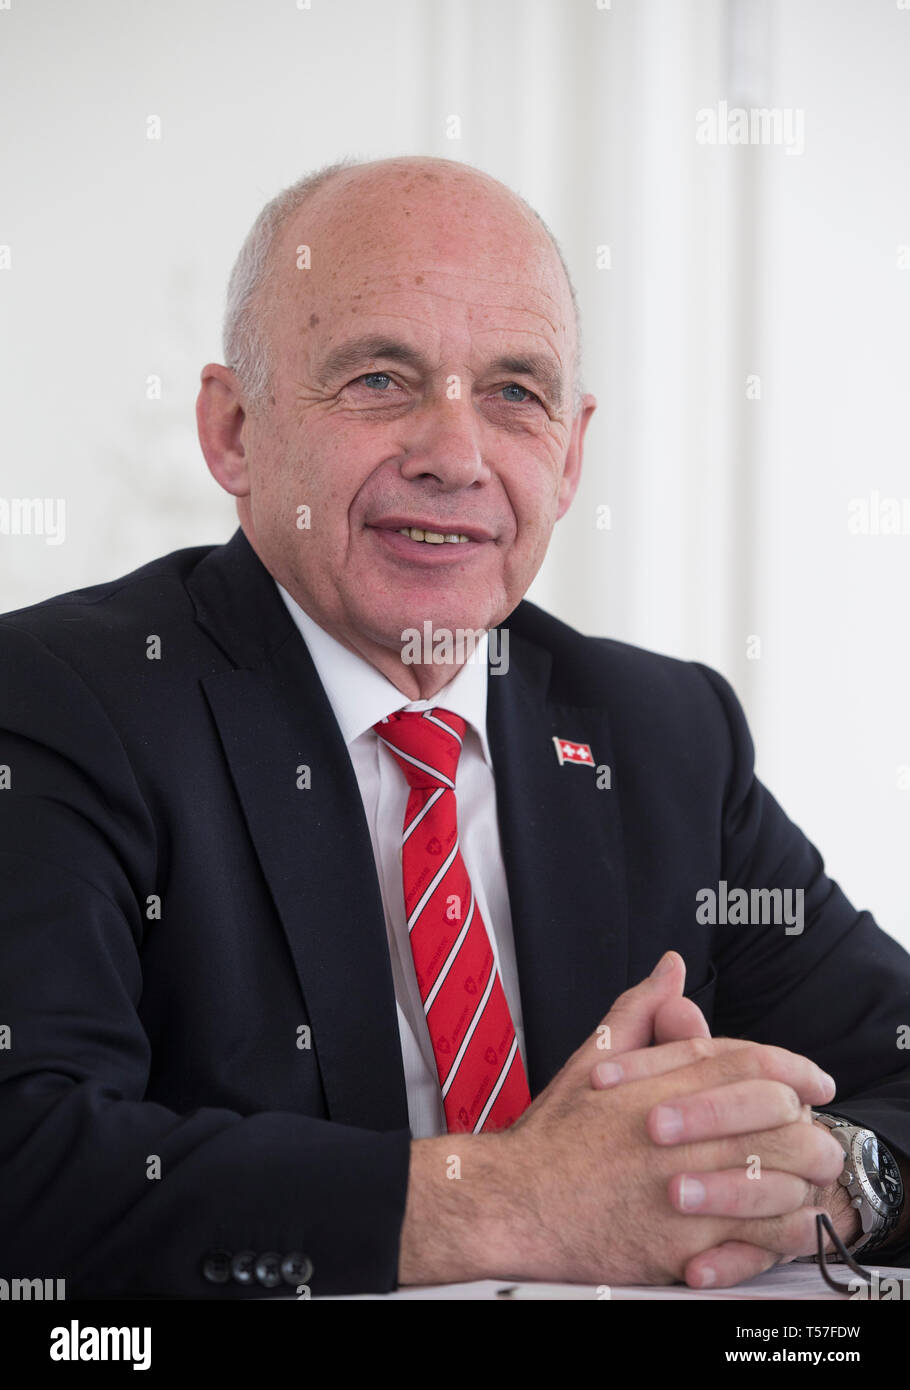 Bern, Switzerland. 16th Apr, 2019. President Ueli Maurer of the Swiss Confederation receives a joint interview with Chinese media in Bern, Switzerland, on April 16, 2019. China's Belt and Road Initiative (BRI) is a fundamental task crucial for generations to come, which, when implemented smoothly, will bring many benefits to both the economic development and the well-being of the people worldwide, Maurer has said. TO GO WITH Interview: BRI crucial for generations to come: President of Swiss Confederation Credit: Xu Jinquan/Xinhua/Alamy Live News Stock Photo